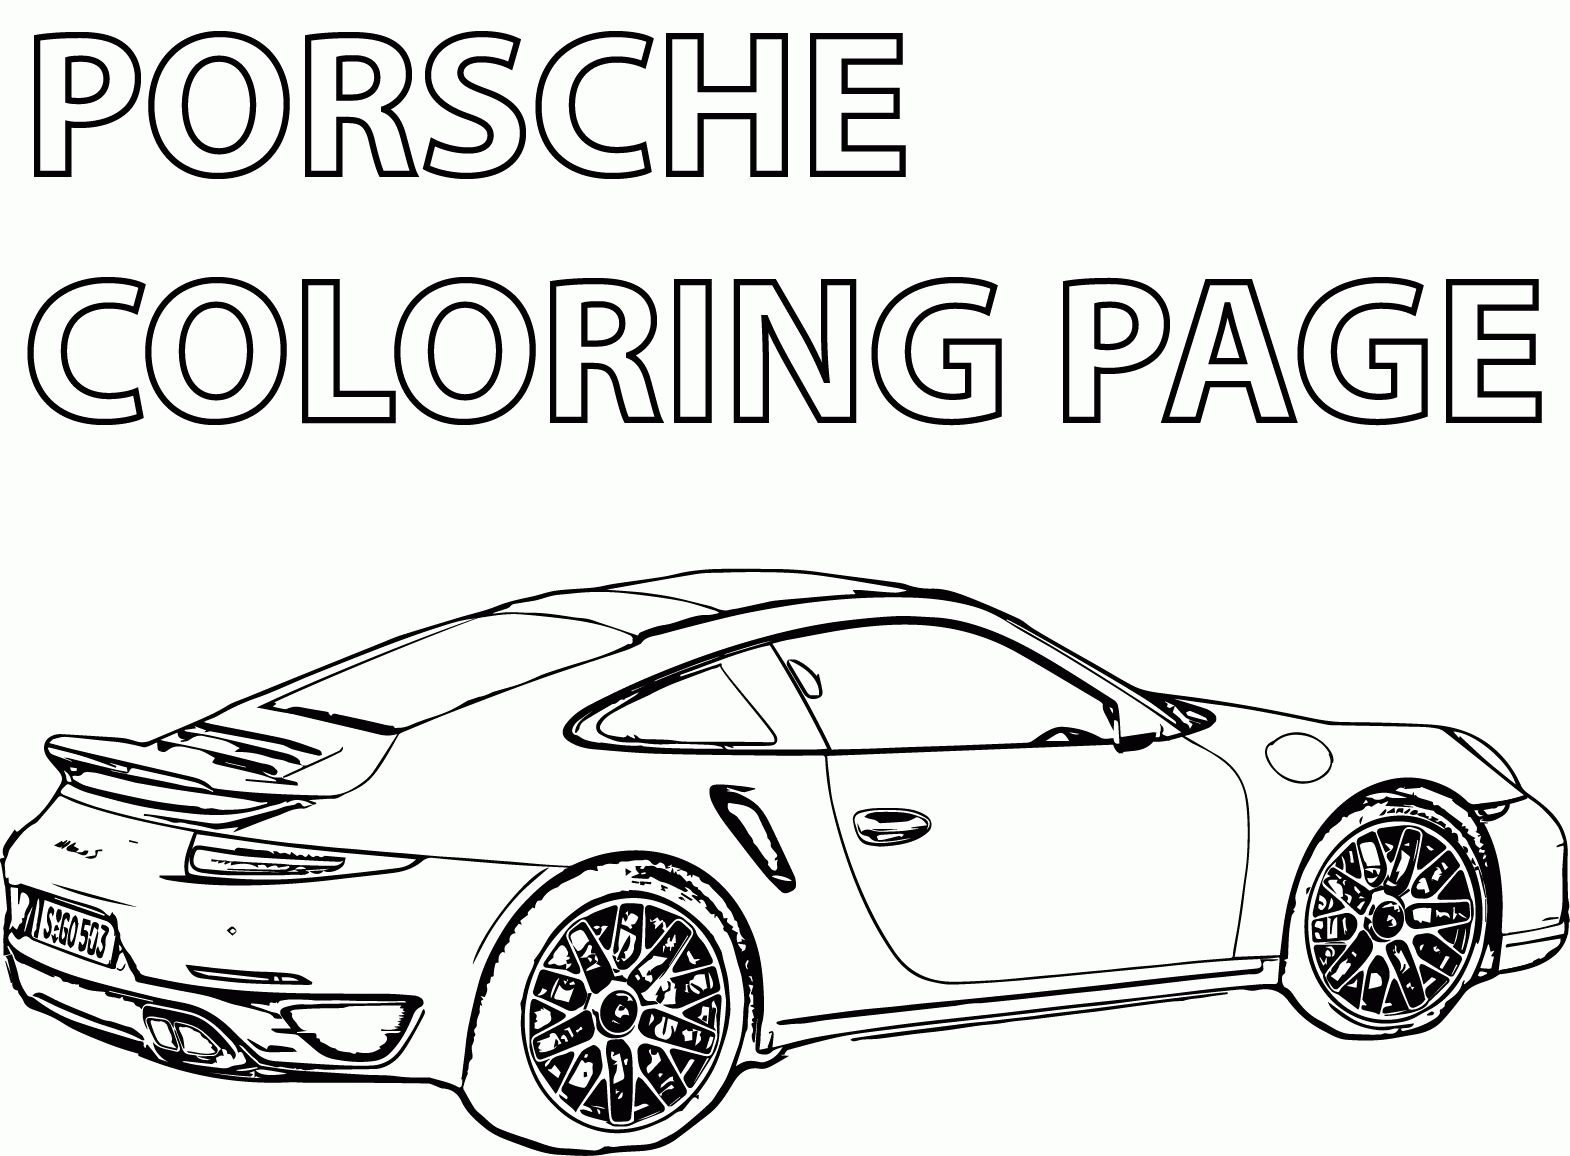 porsche colouring pages porsche 911 drawing at getdrawingscom free for personal porsche colouring pages 